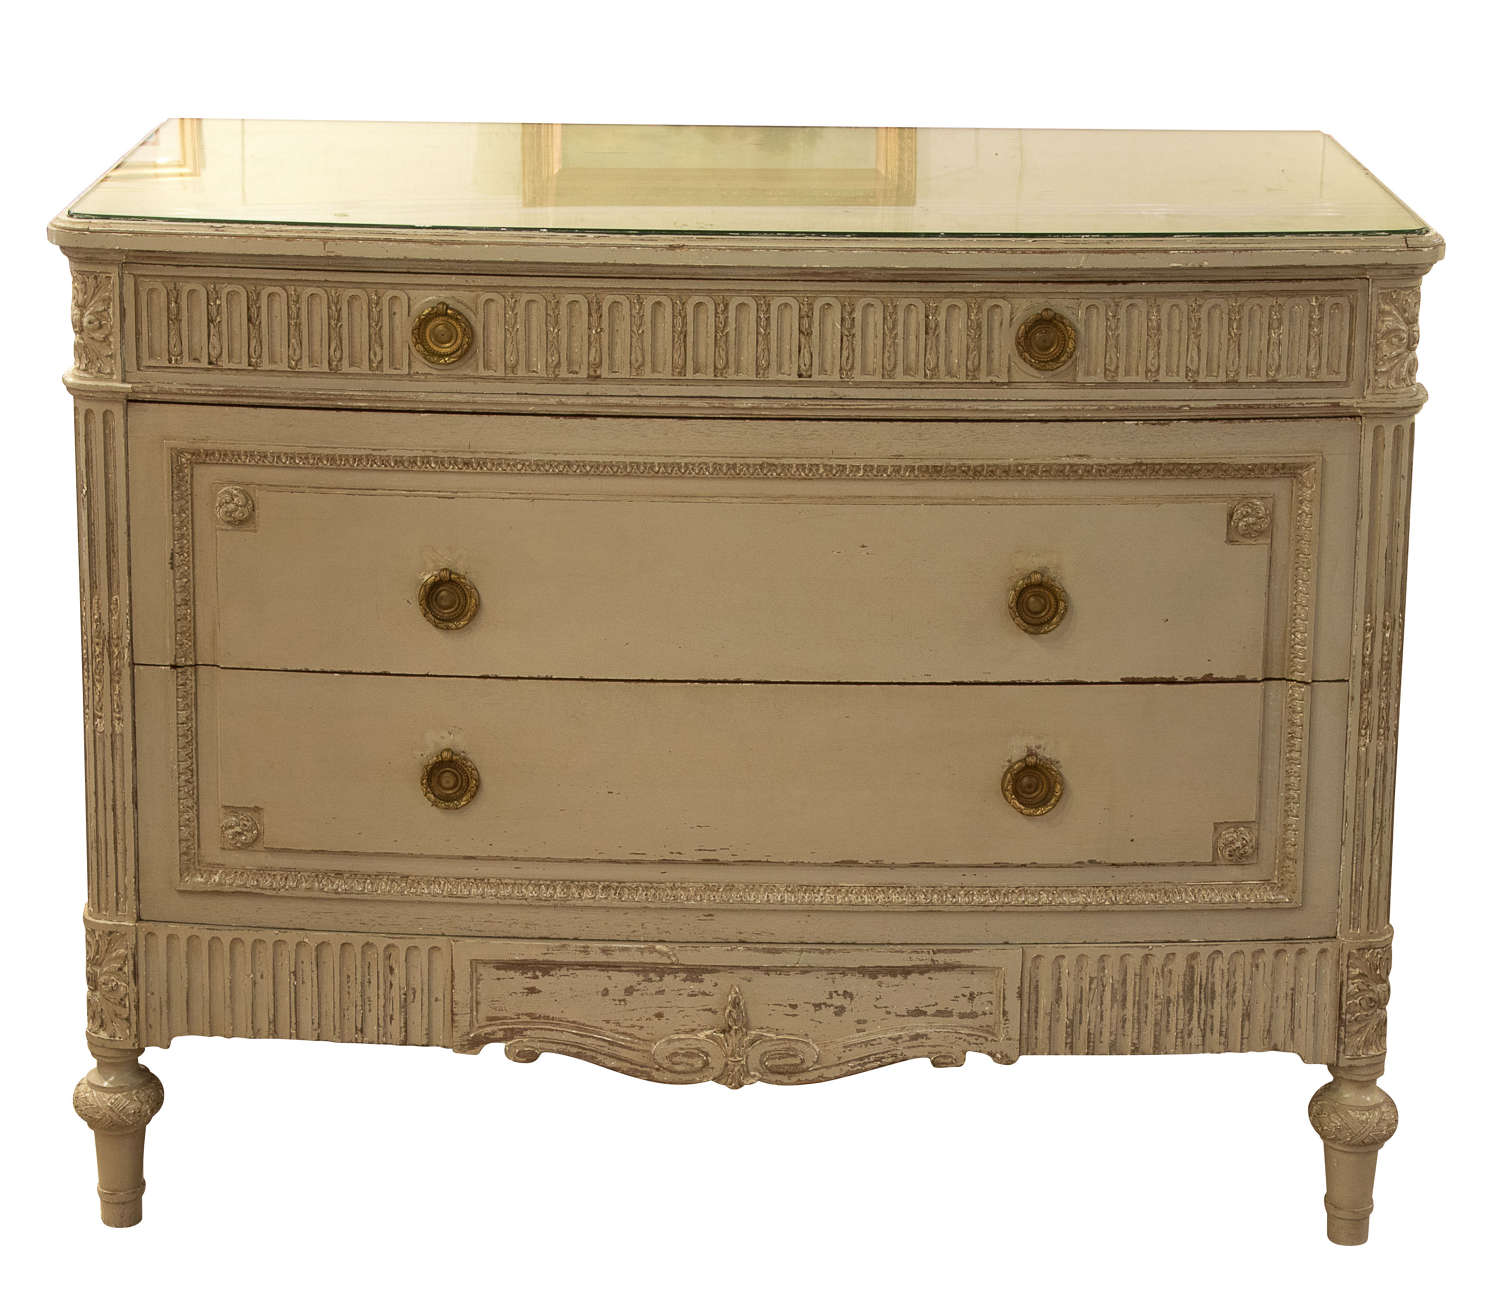 Painted bow fronted commode with plate glass top c1900